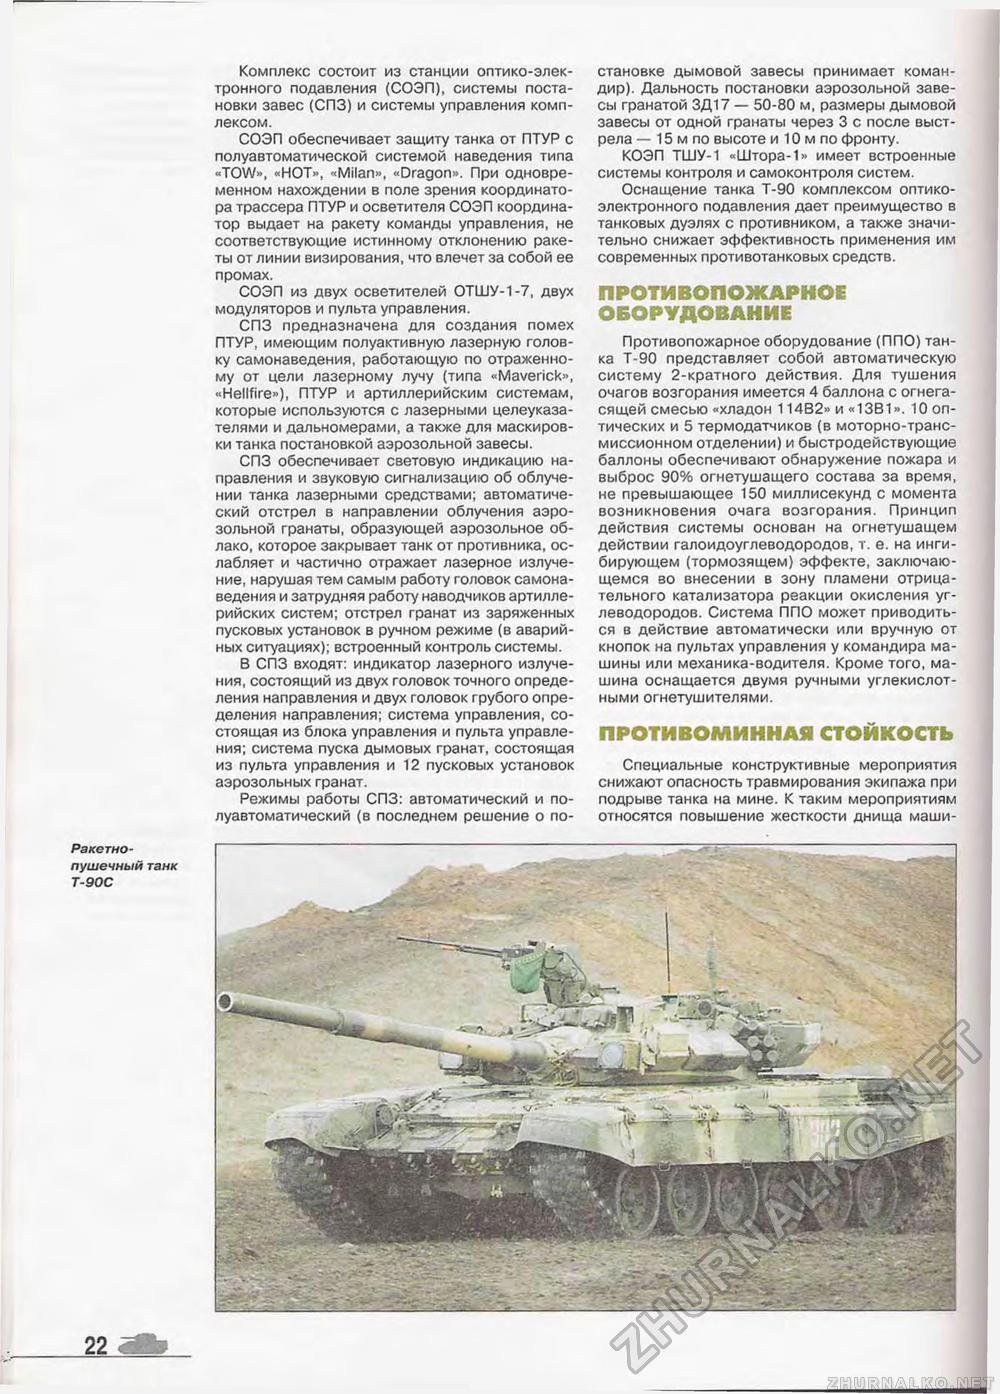  Special - T-90,  24